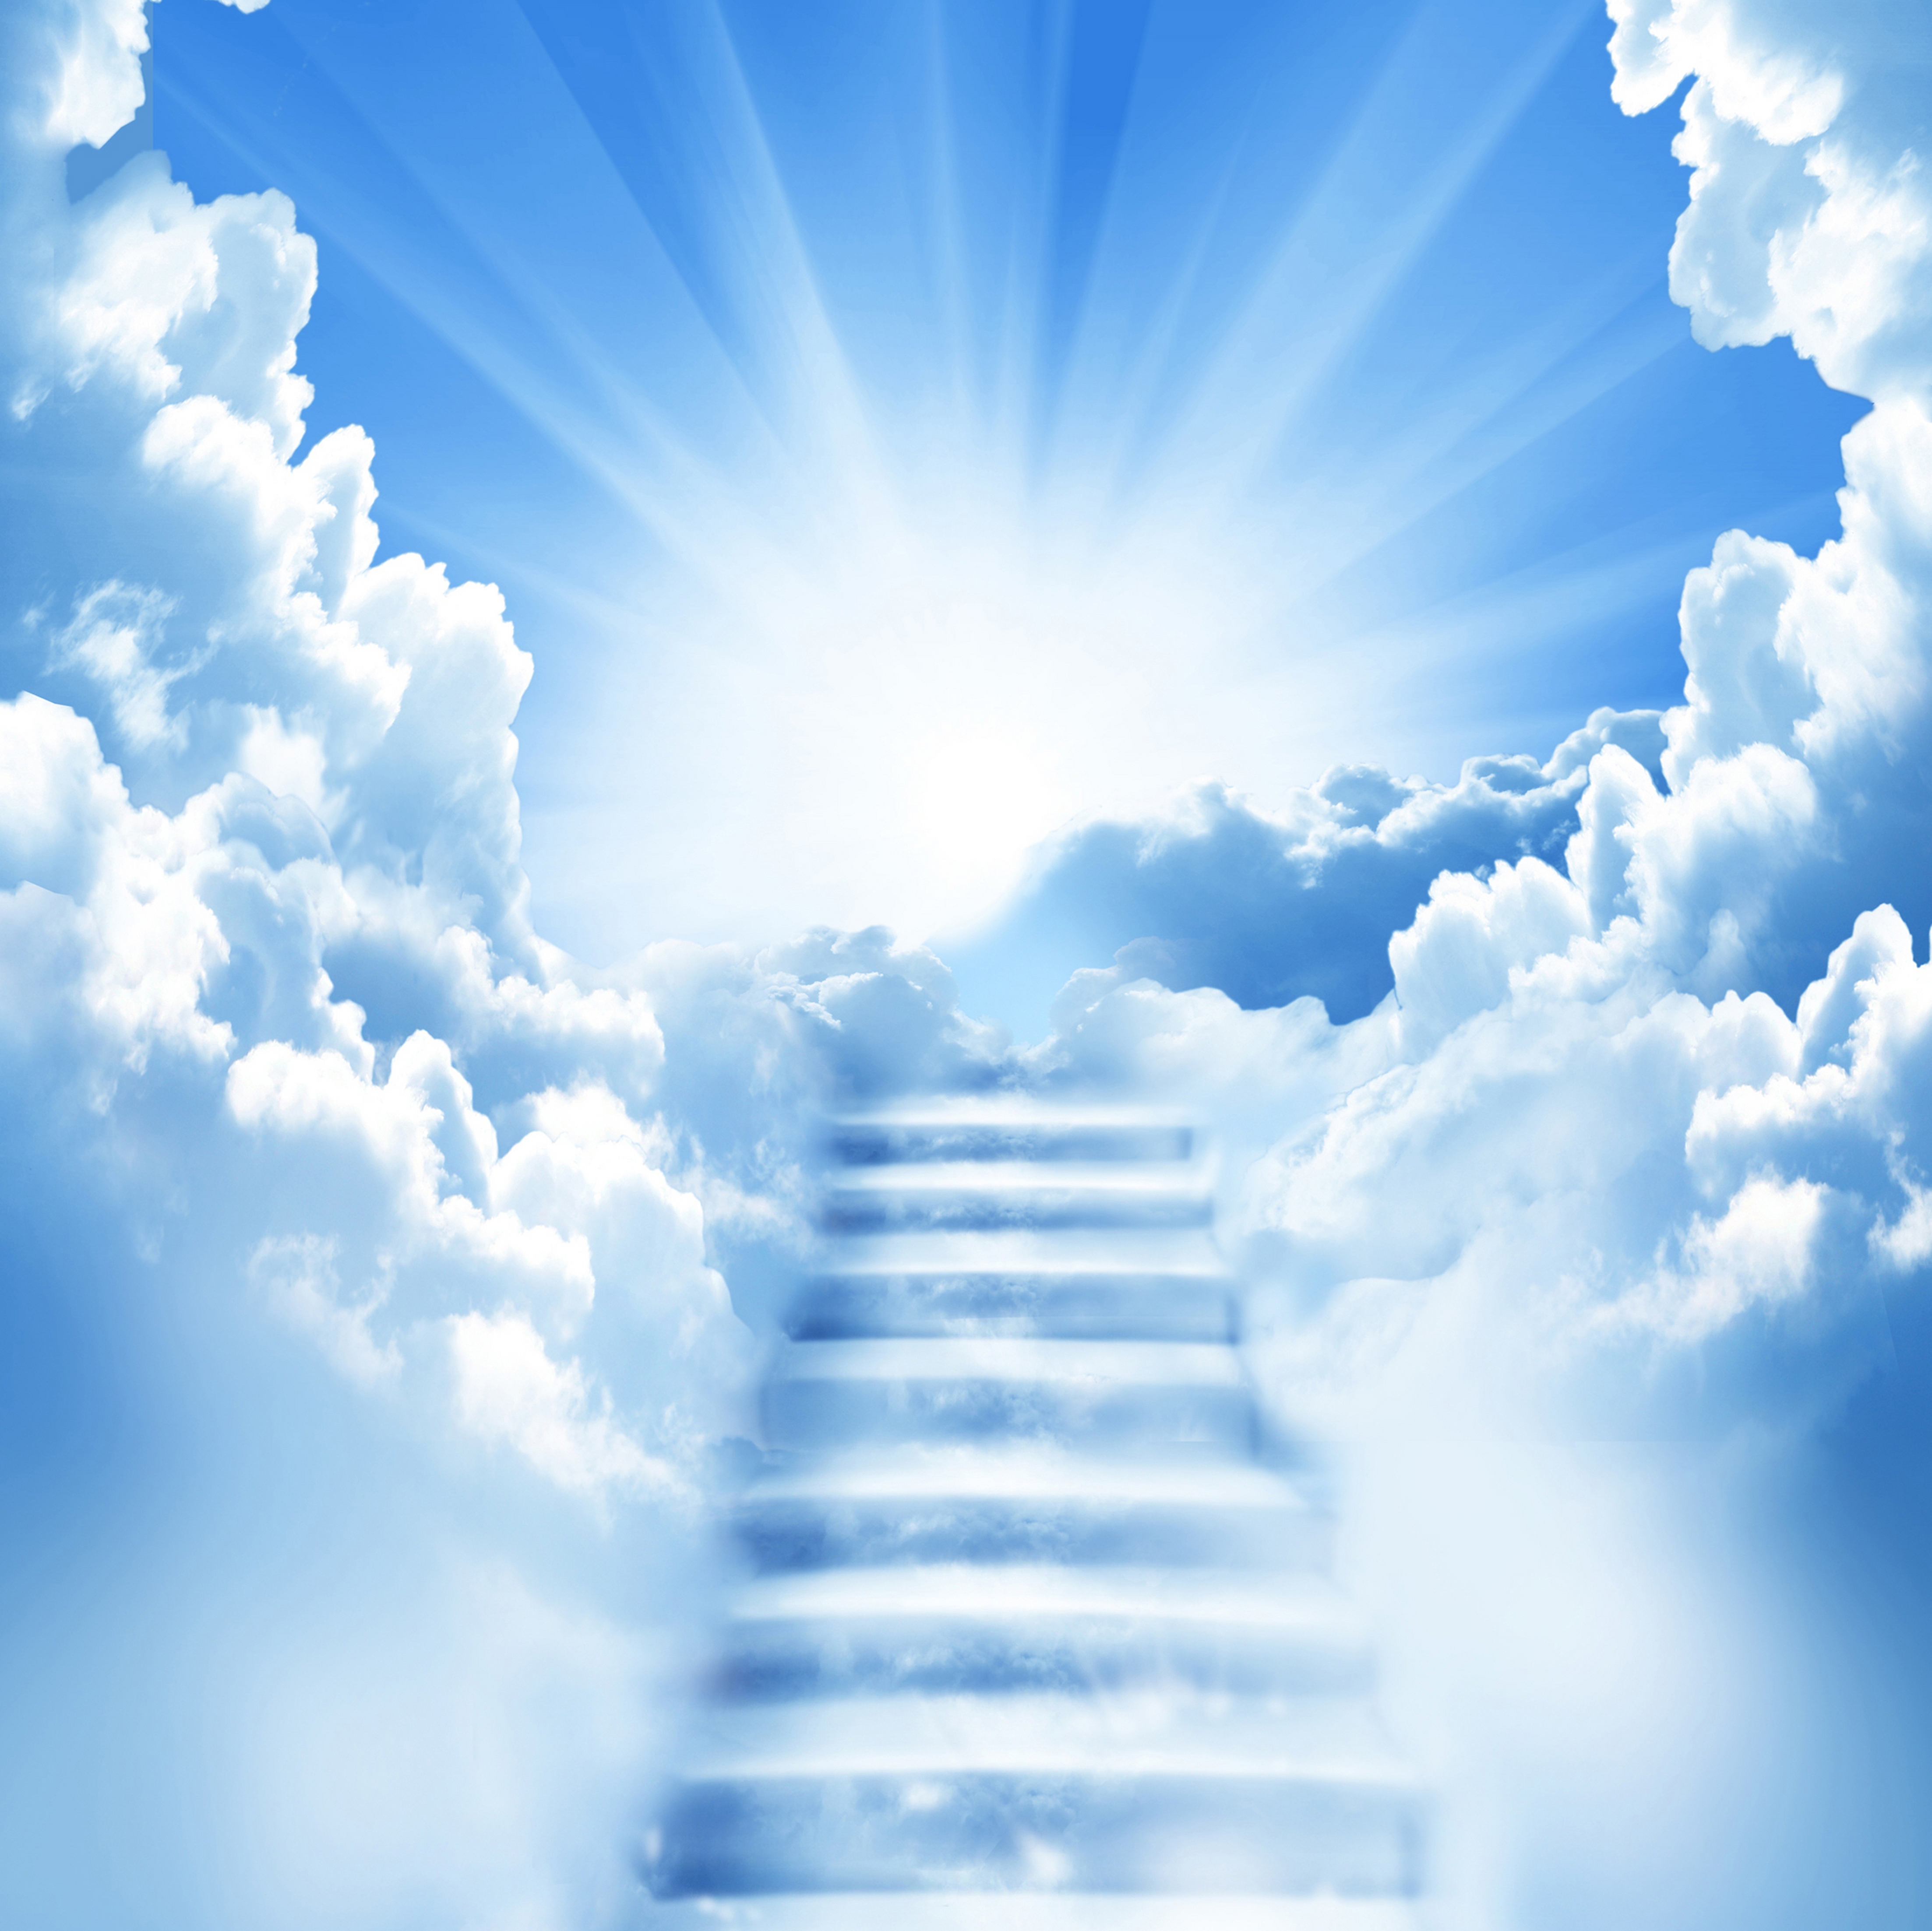  47 2560x1600 Wallpaper  Stairway  to Heaven  on 